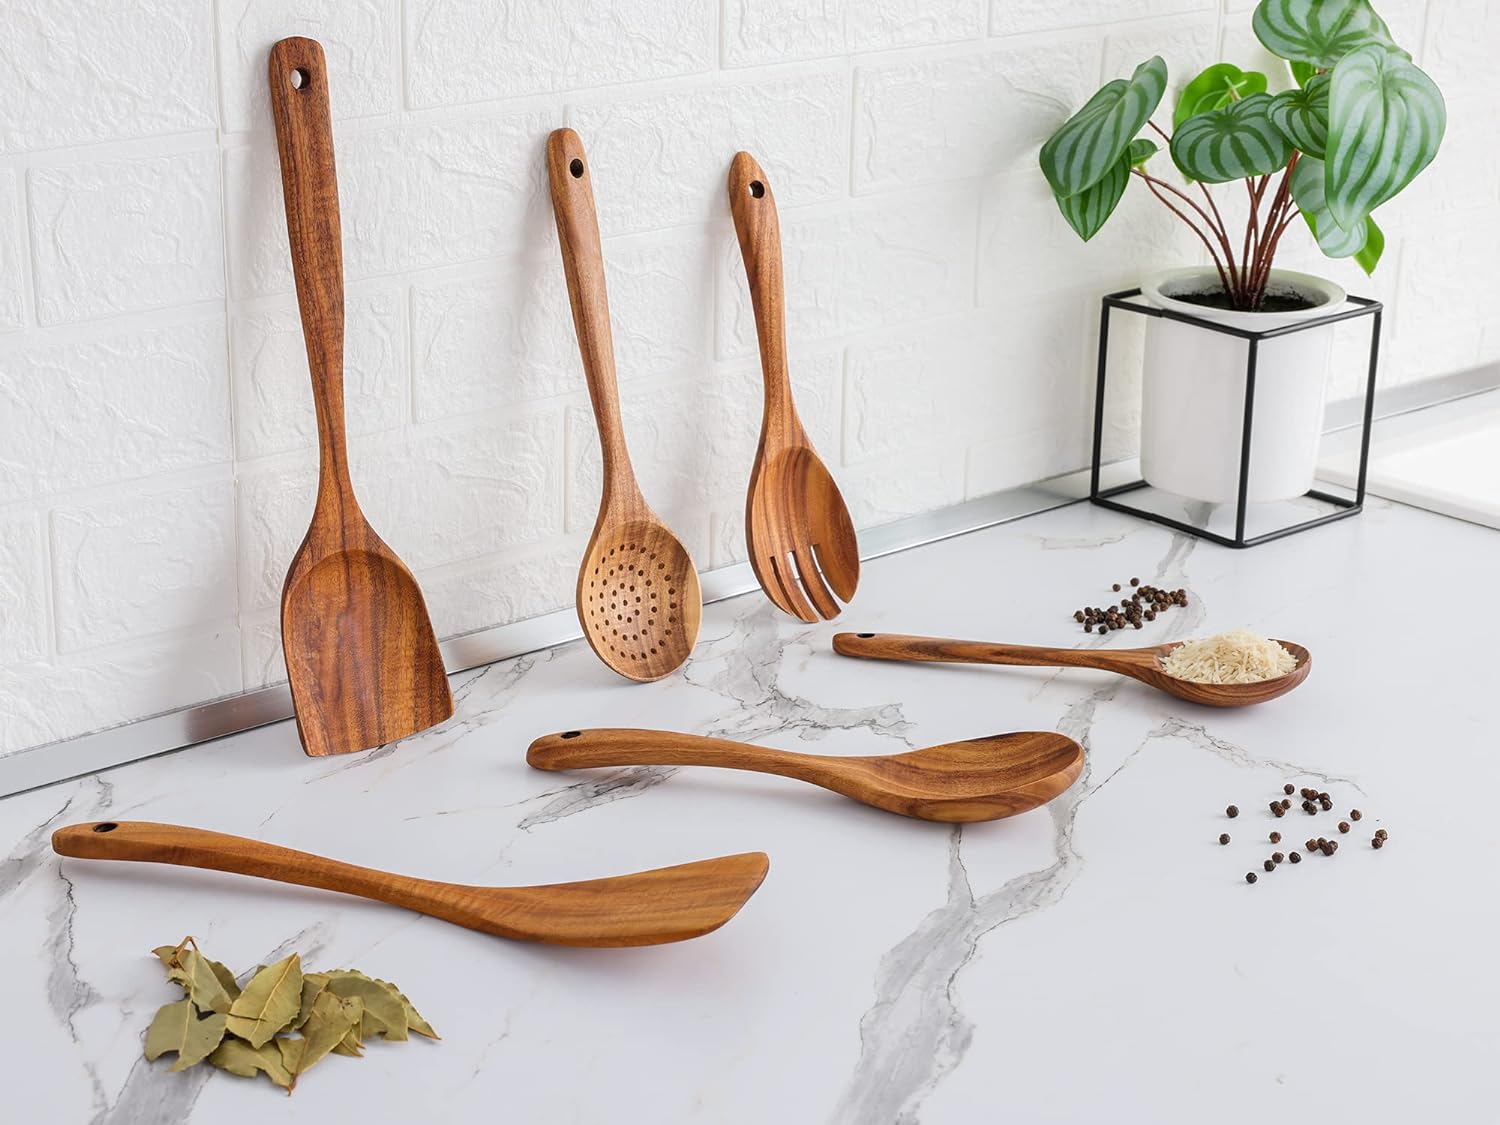 Bamboo Spoons with Soft Silicone Tips